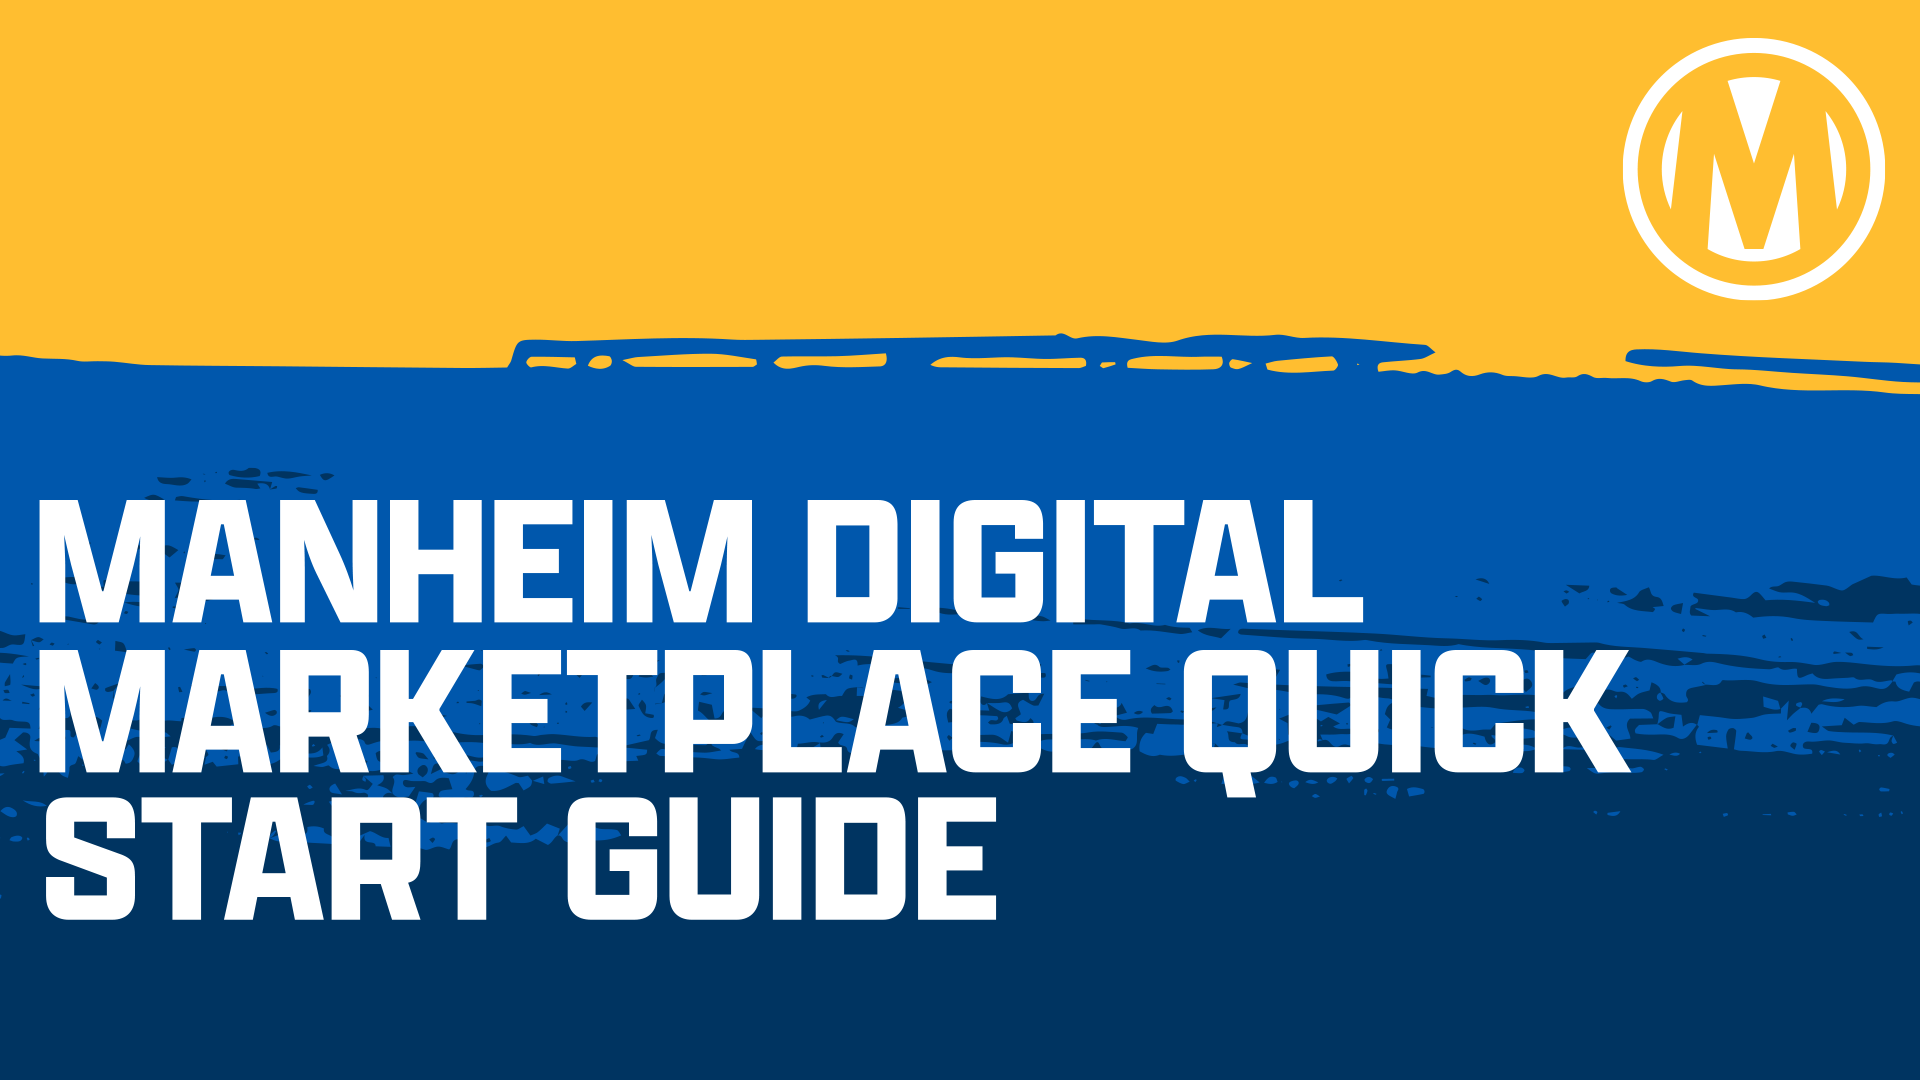 Quick Start Guide to Selling in the Manheim Digital Marketplace